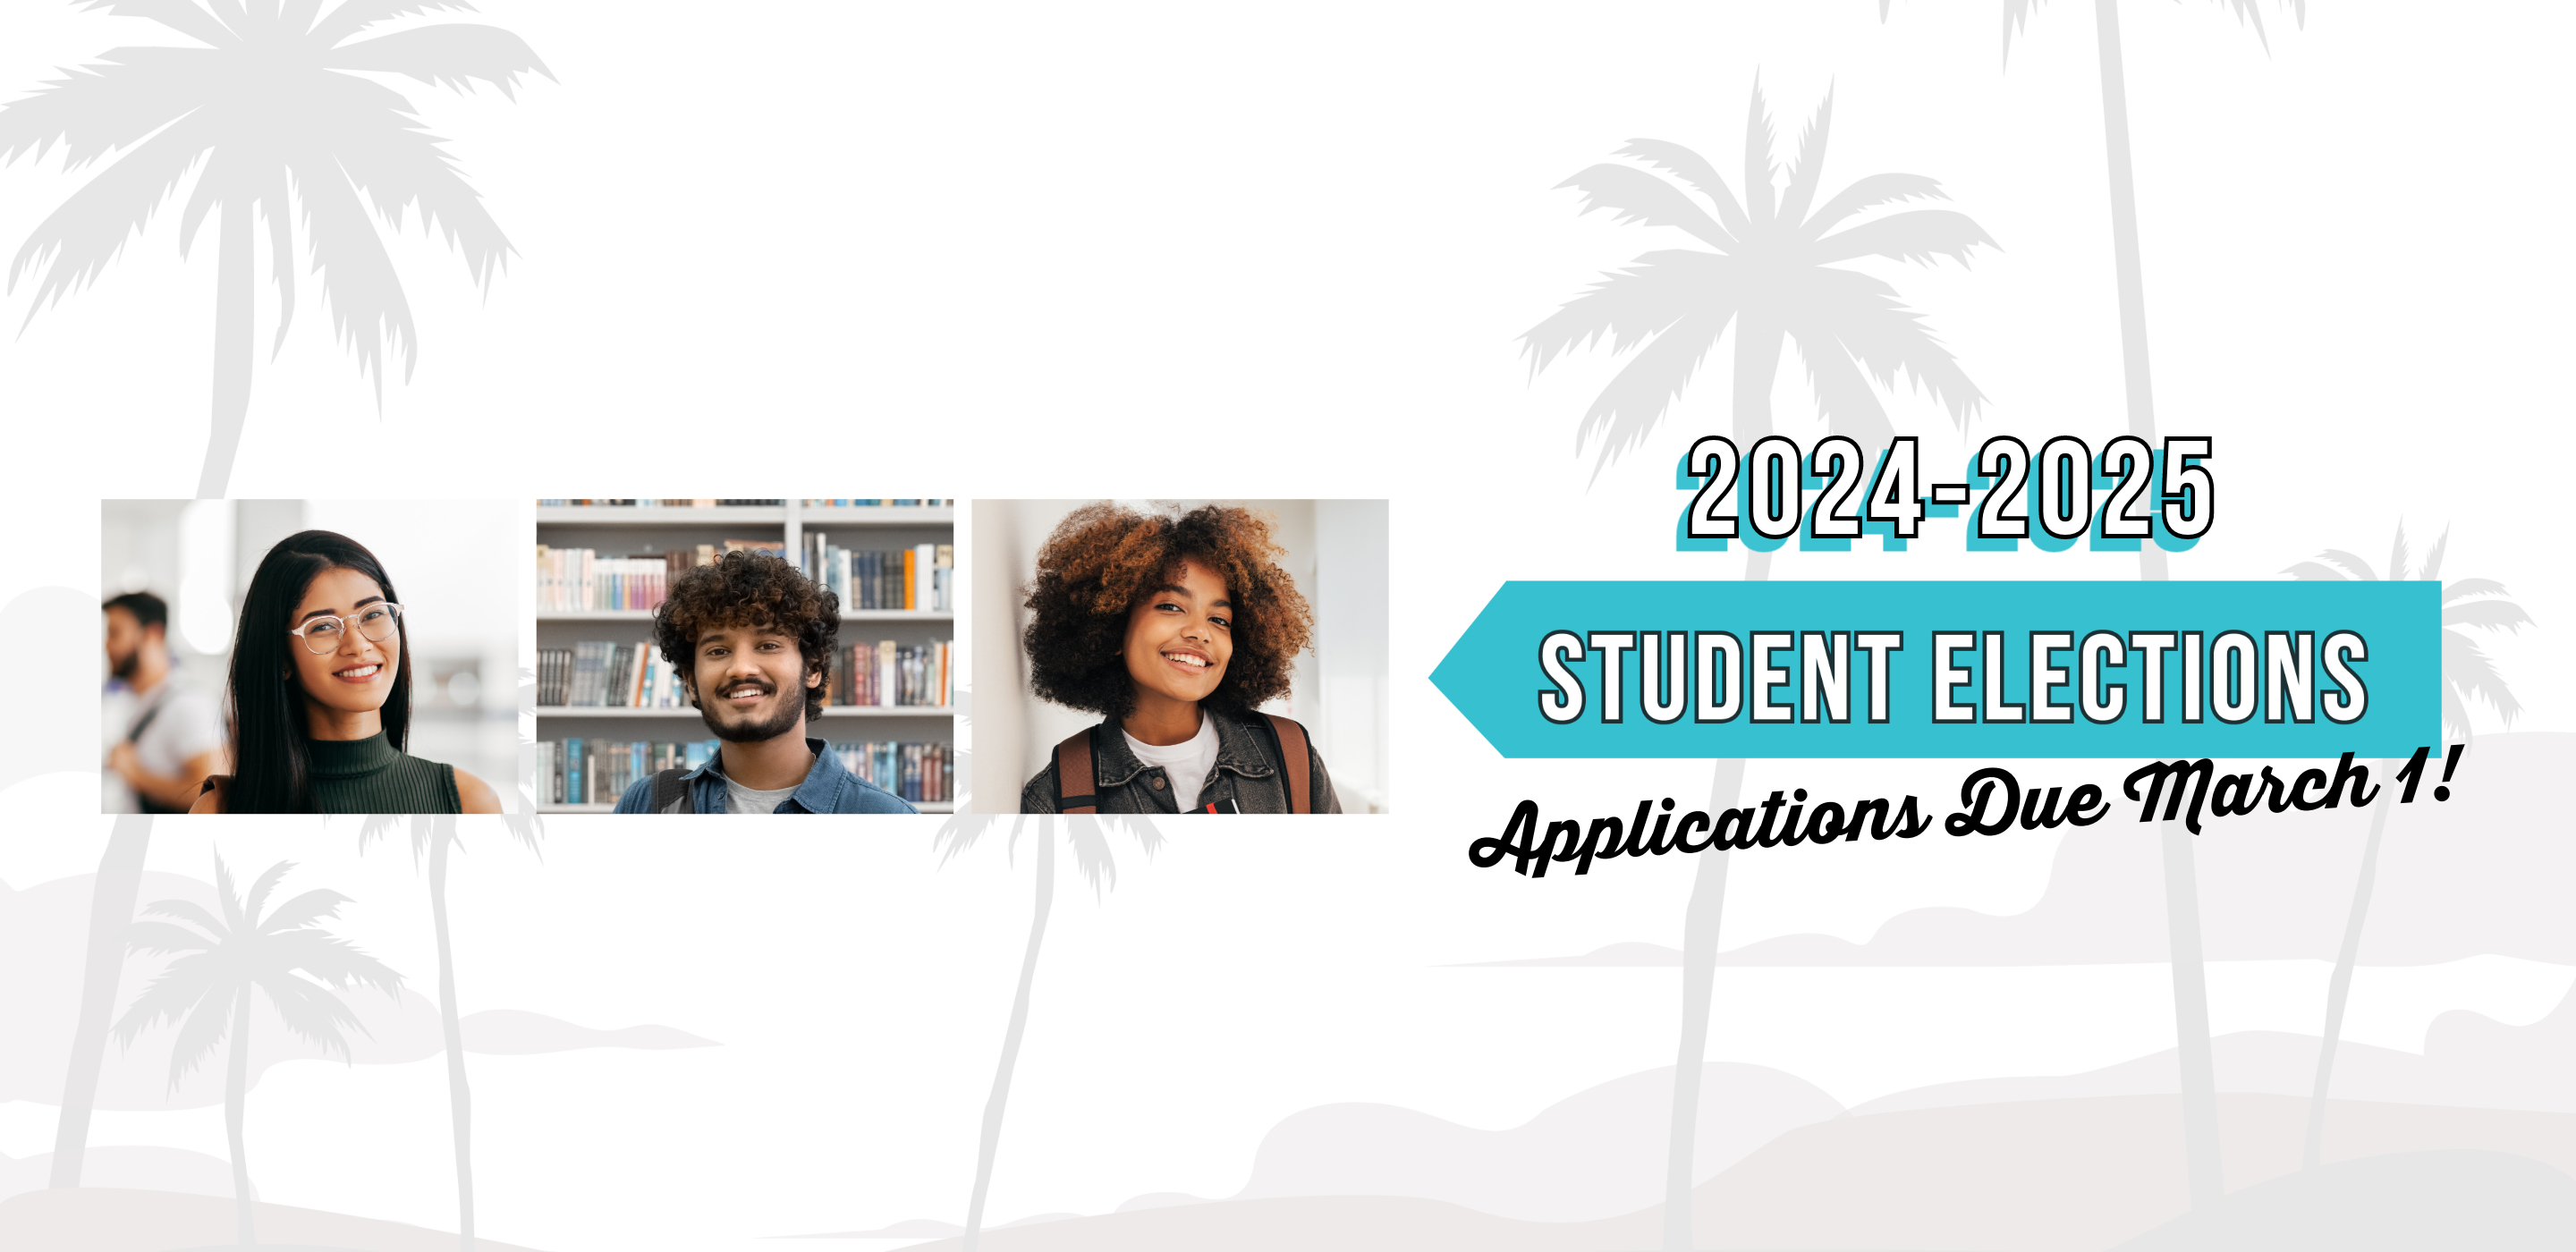 2024-2025 Student Elections Applications Due March 1!